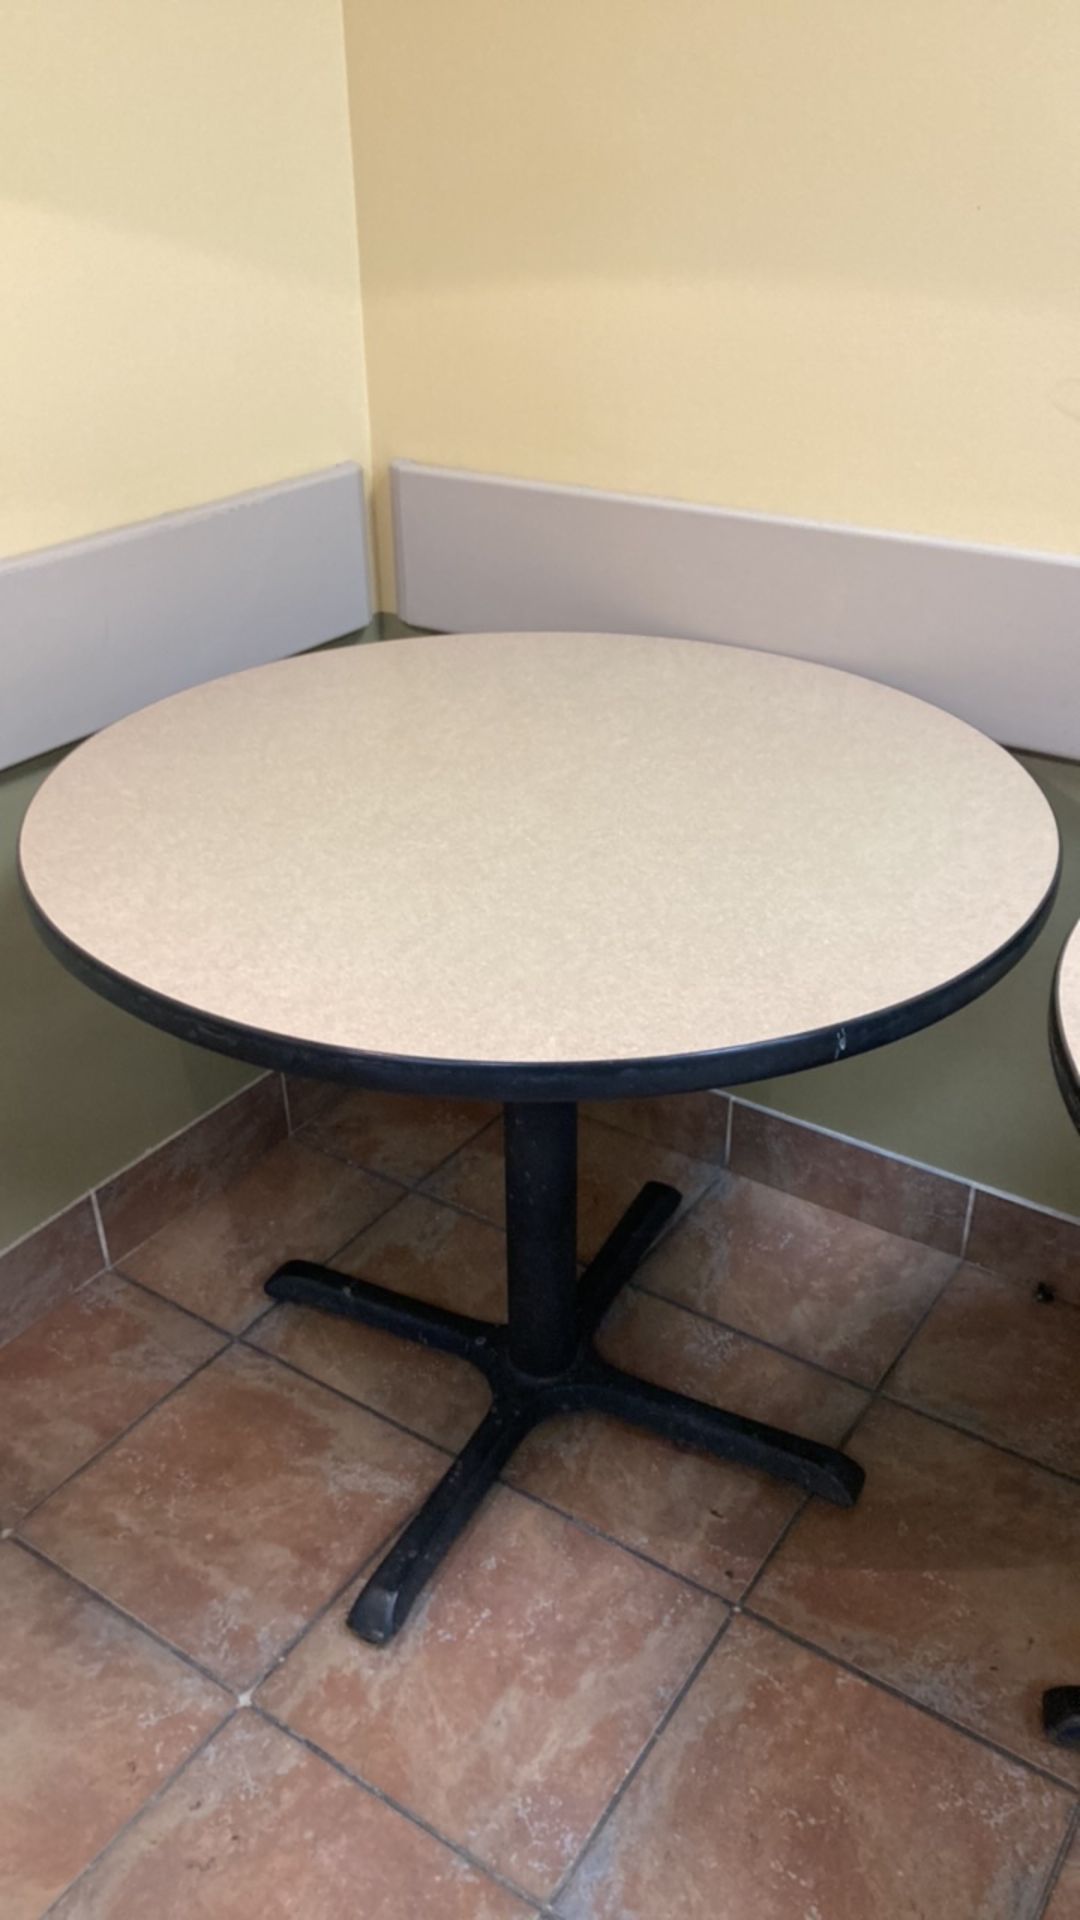 LOT OF 2 CIRCULAR TABLES - Image 2 of 3